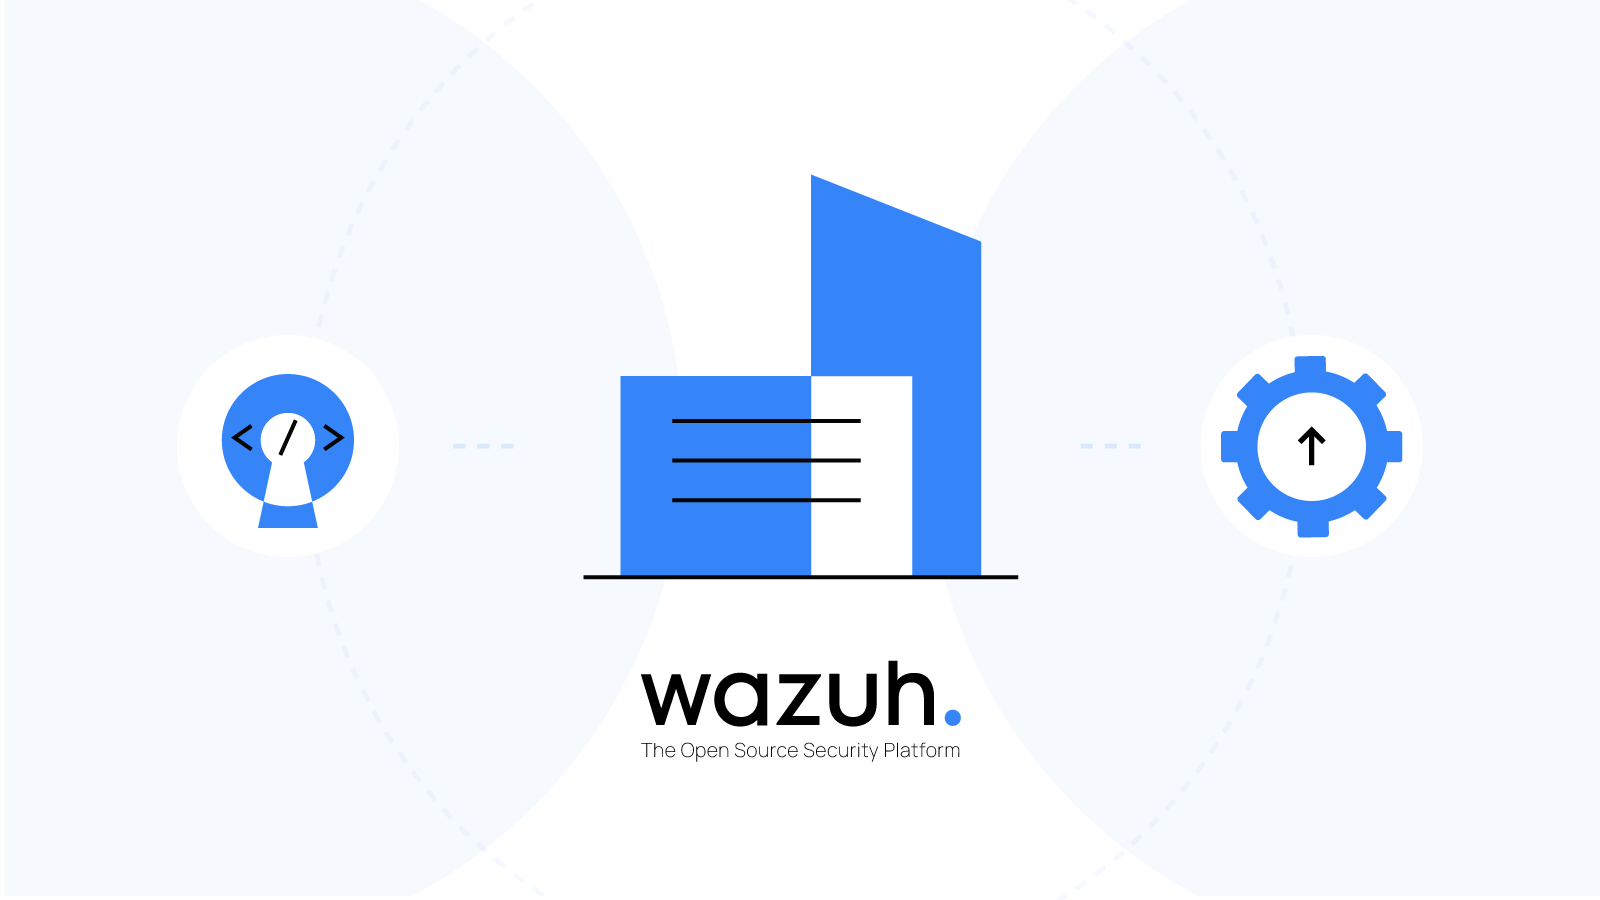 How SMEs can use Wazuh to improve cybersecurity